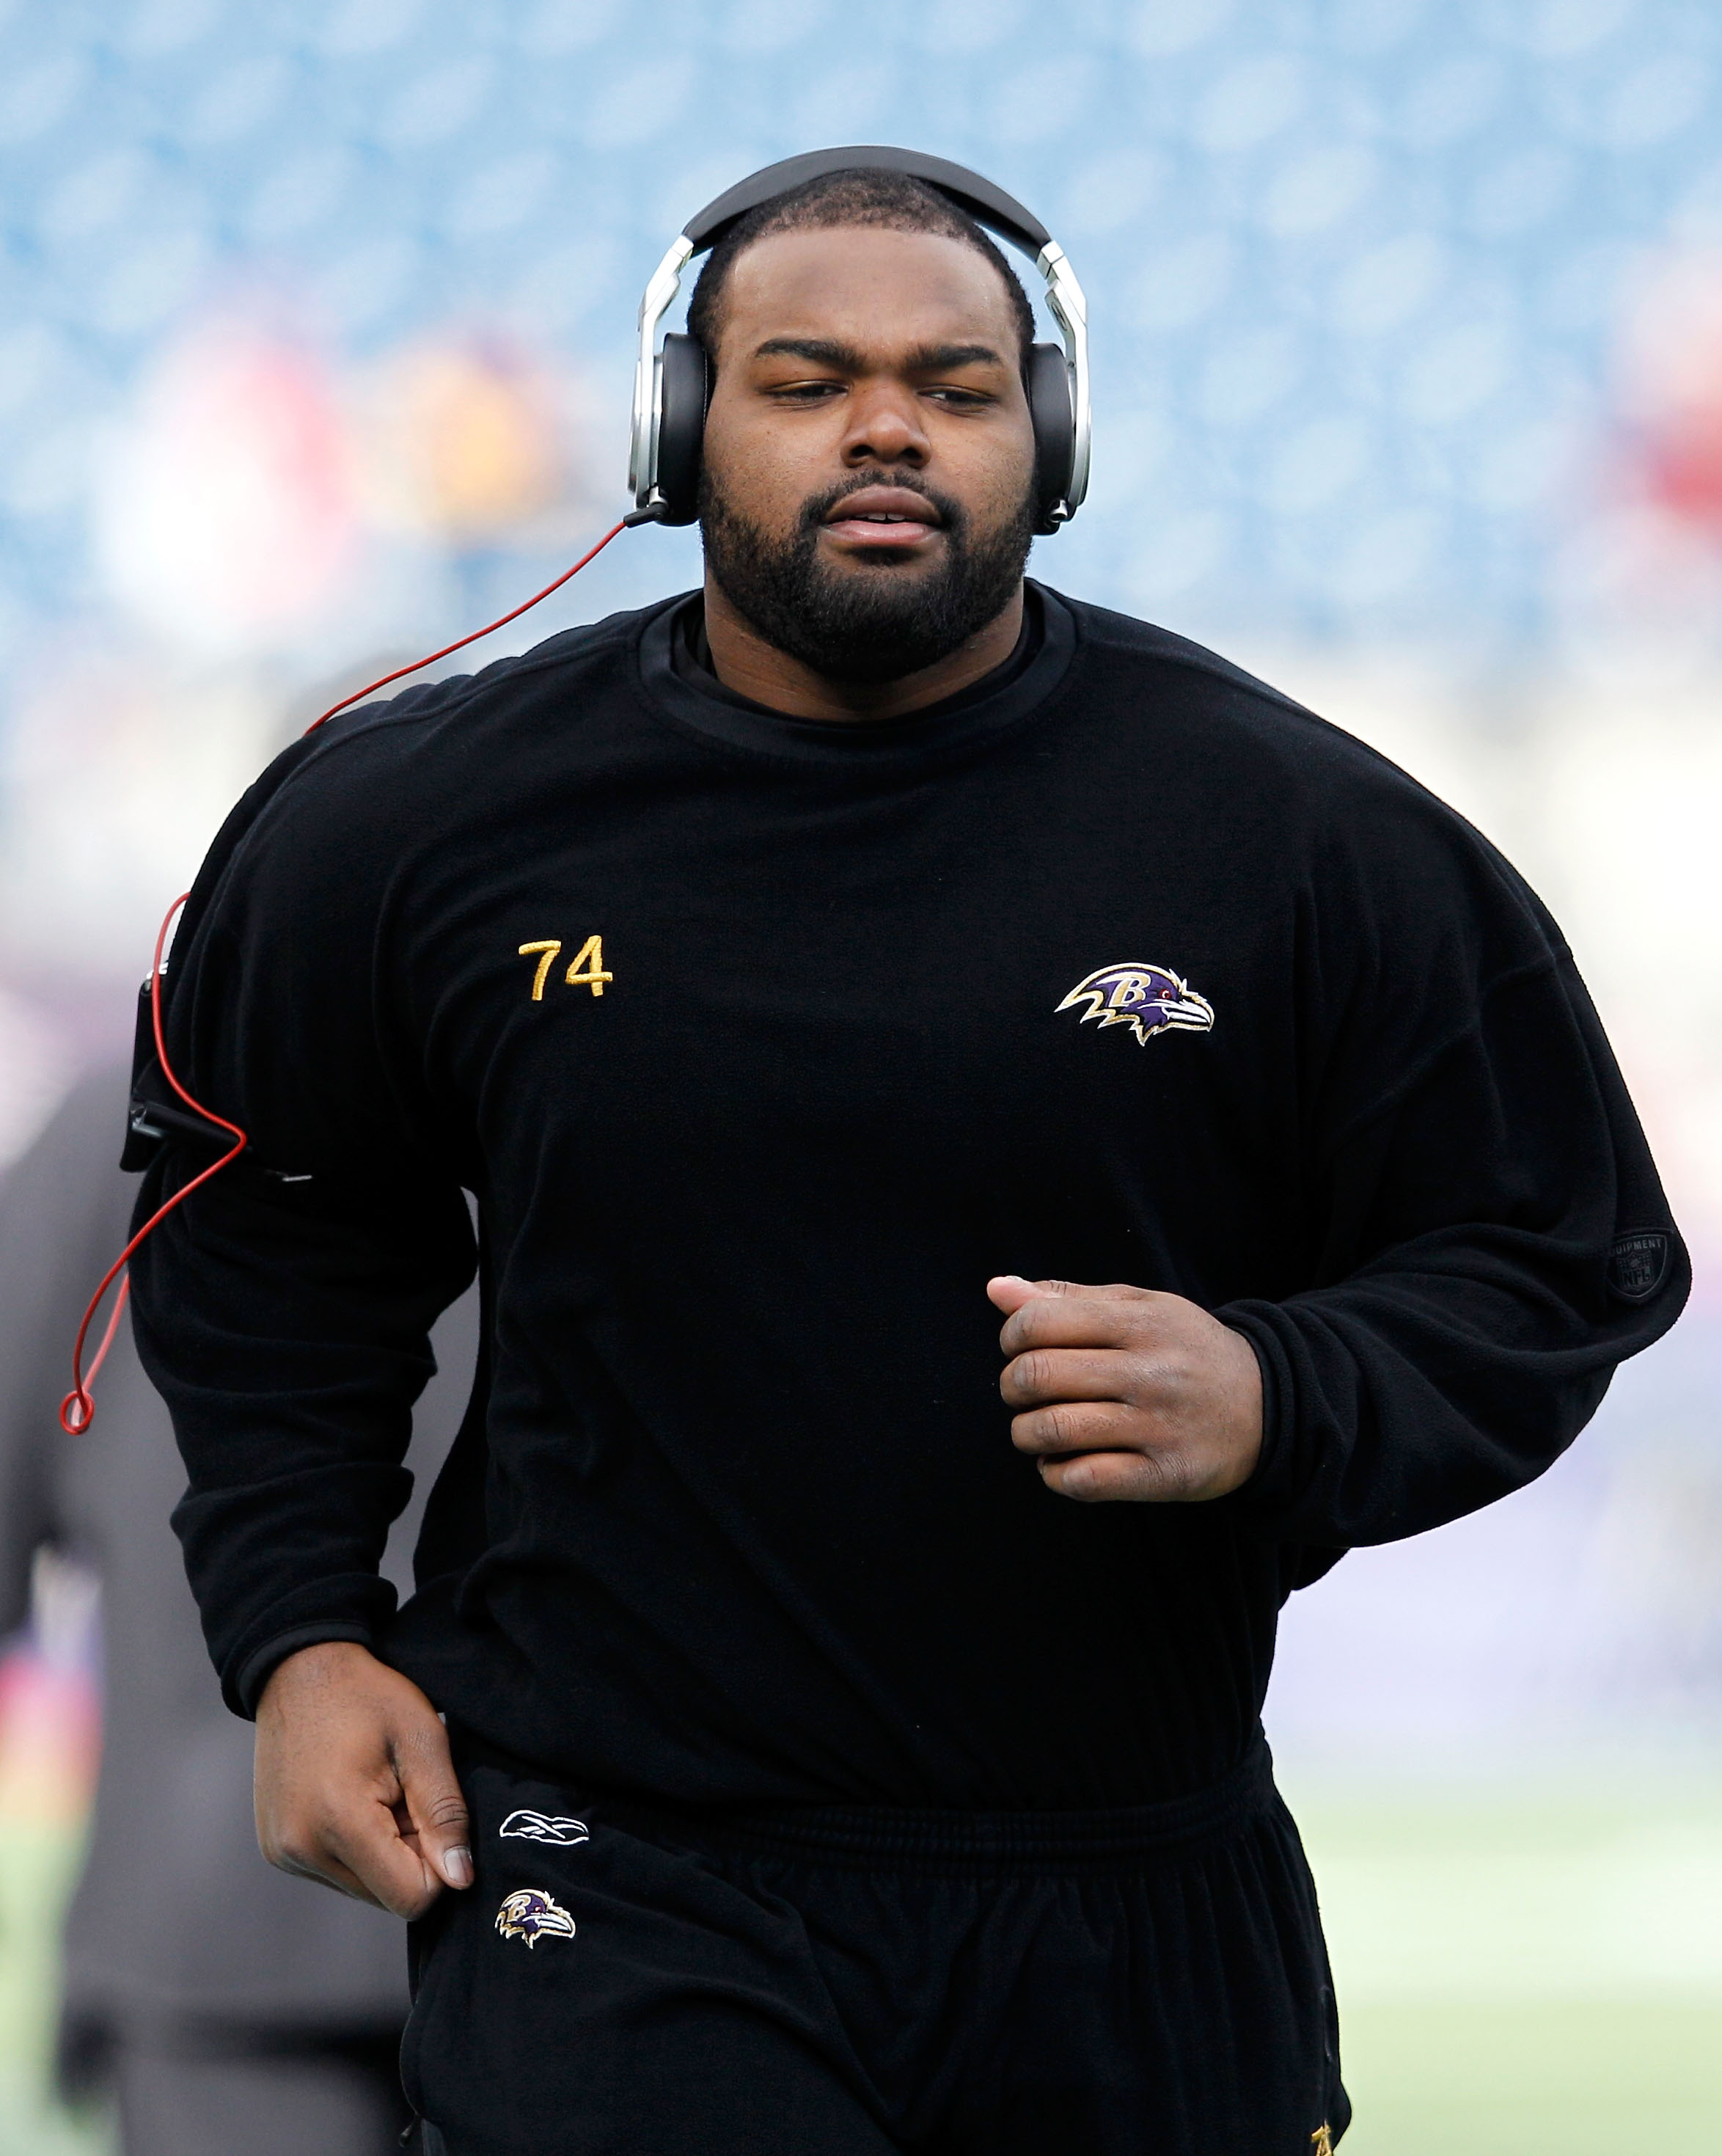 Michael Oher warms up prior to their AFC Championship Game against the New England Patriots on January 22, 2012, in Foxboro, Massachusetts. | Source: Getty Images